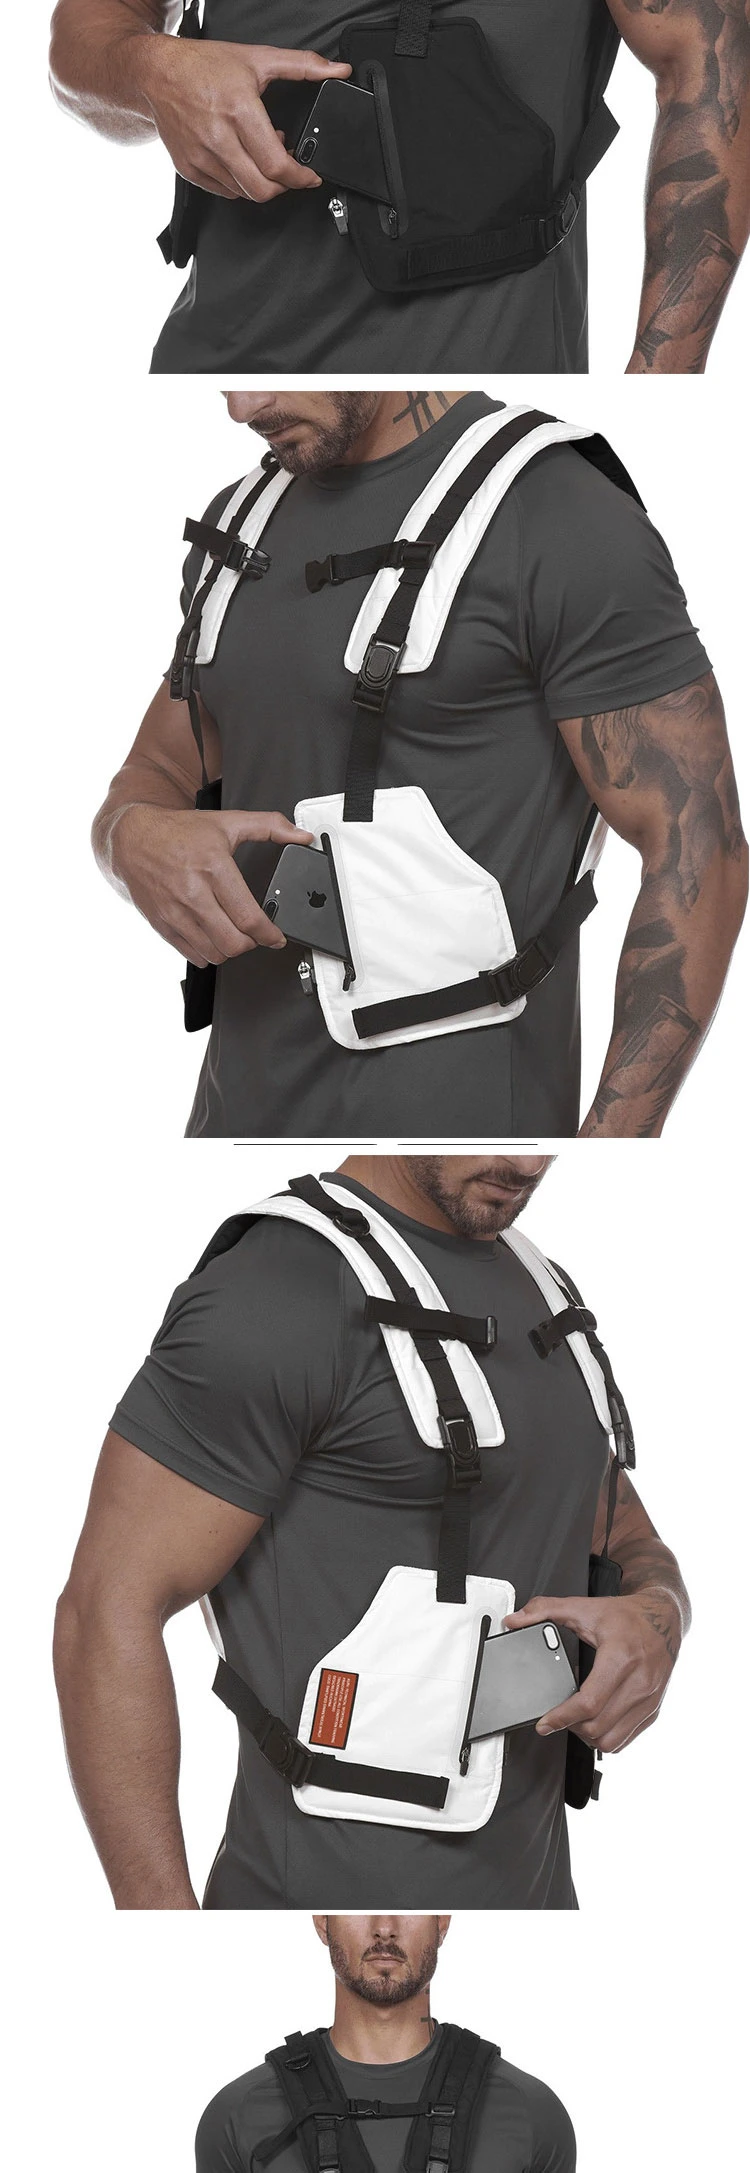 2009 New Multifunctional Tactical Vest Printed Outdoor Protective Vest Reflective Training Training Uniform